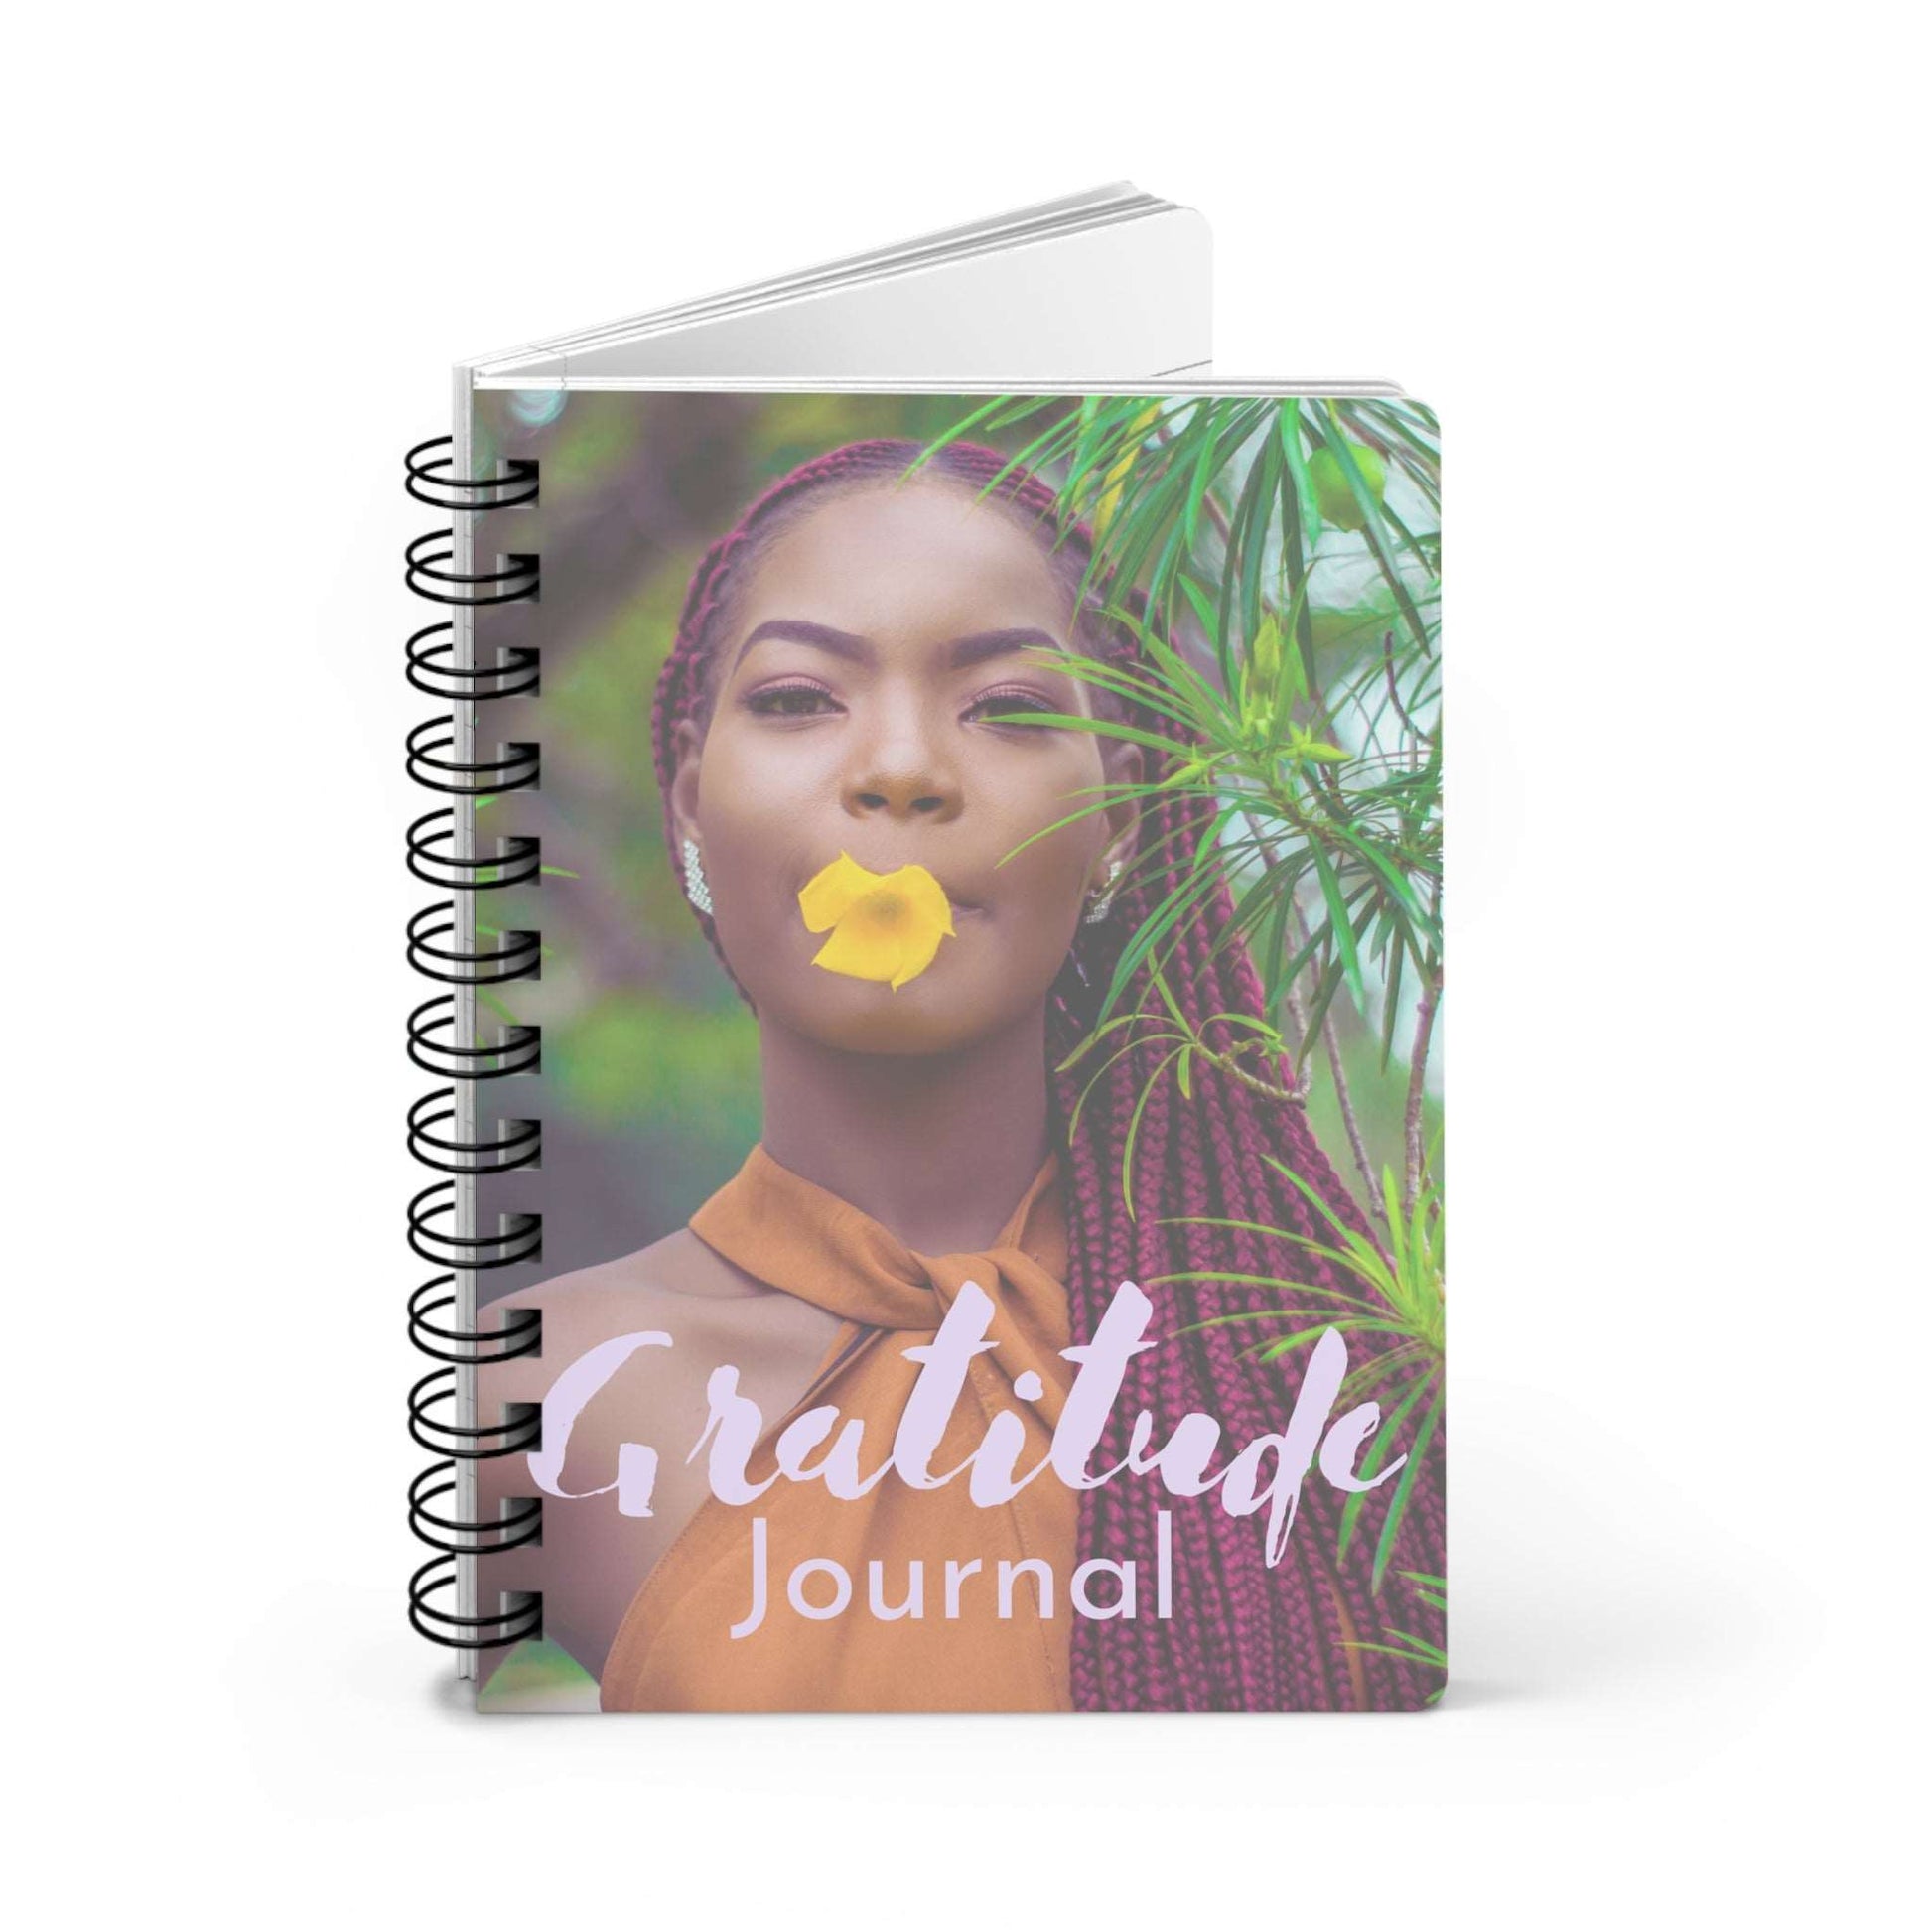 A spiral notebook with the product name "Gratitude Journal : A Journal For Women" on it, perfect for a gratitude journal.